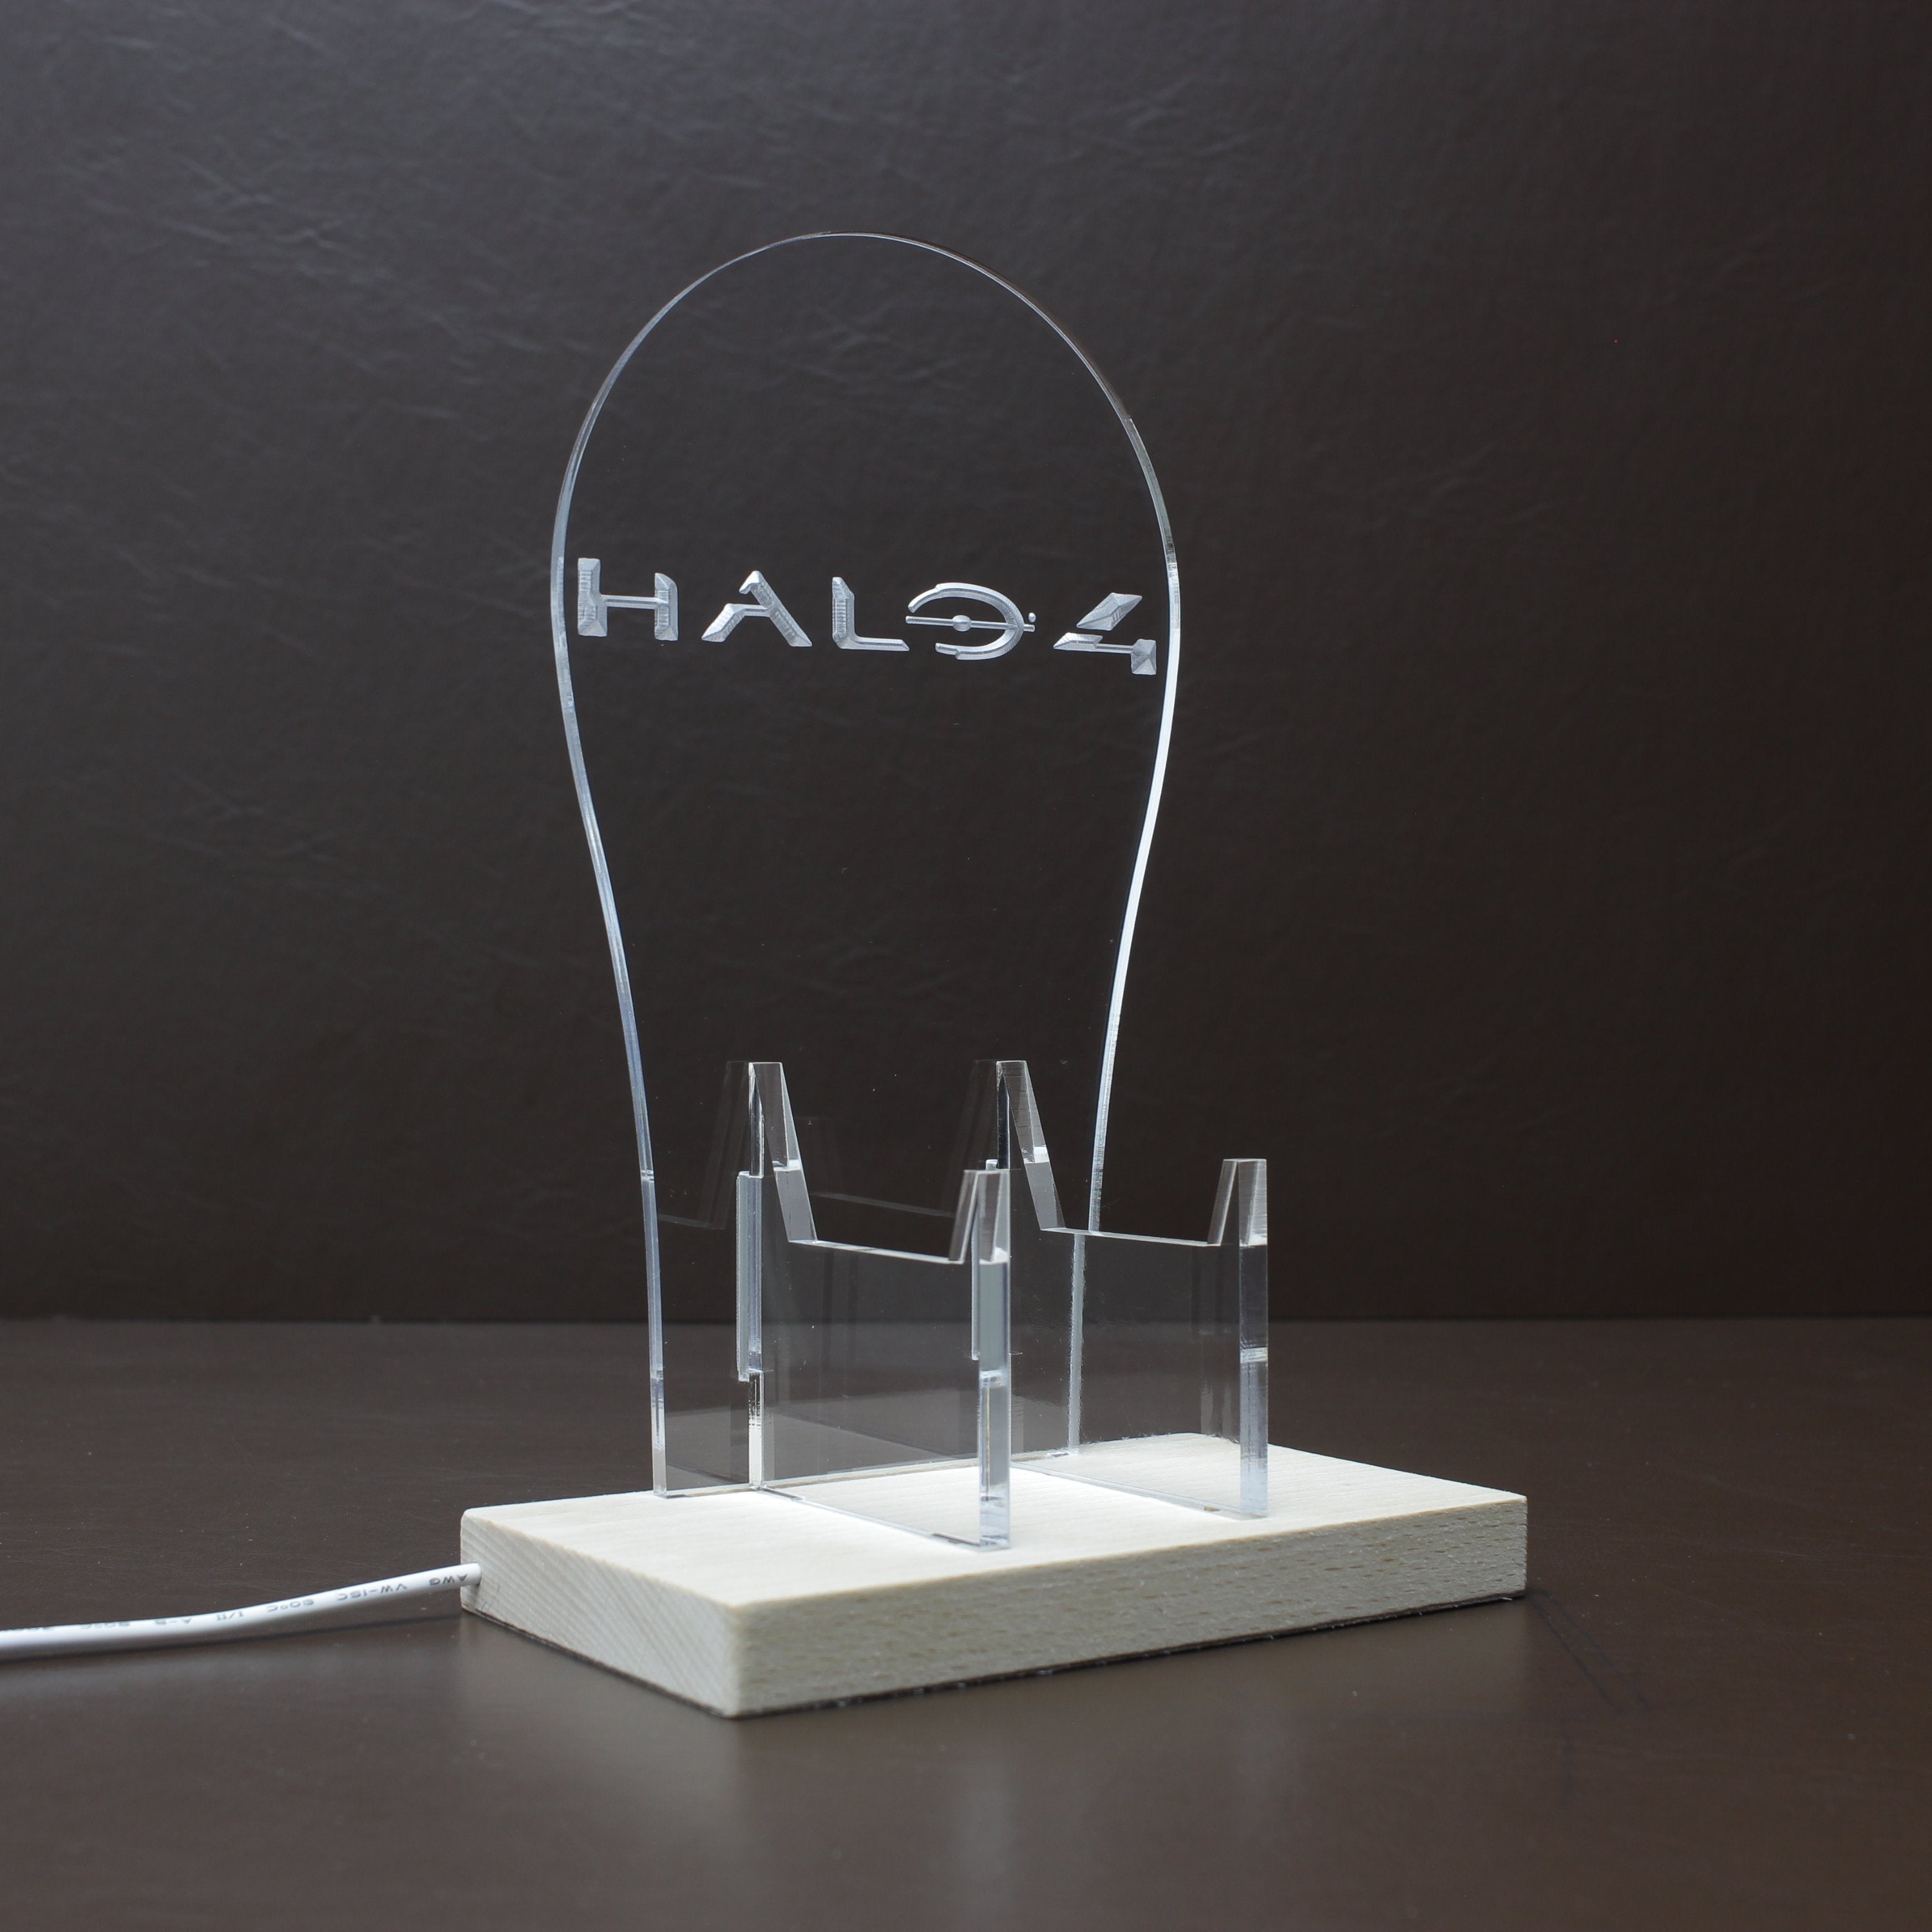 Halo 4 LED Gaming Headset Controller Stand